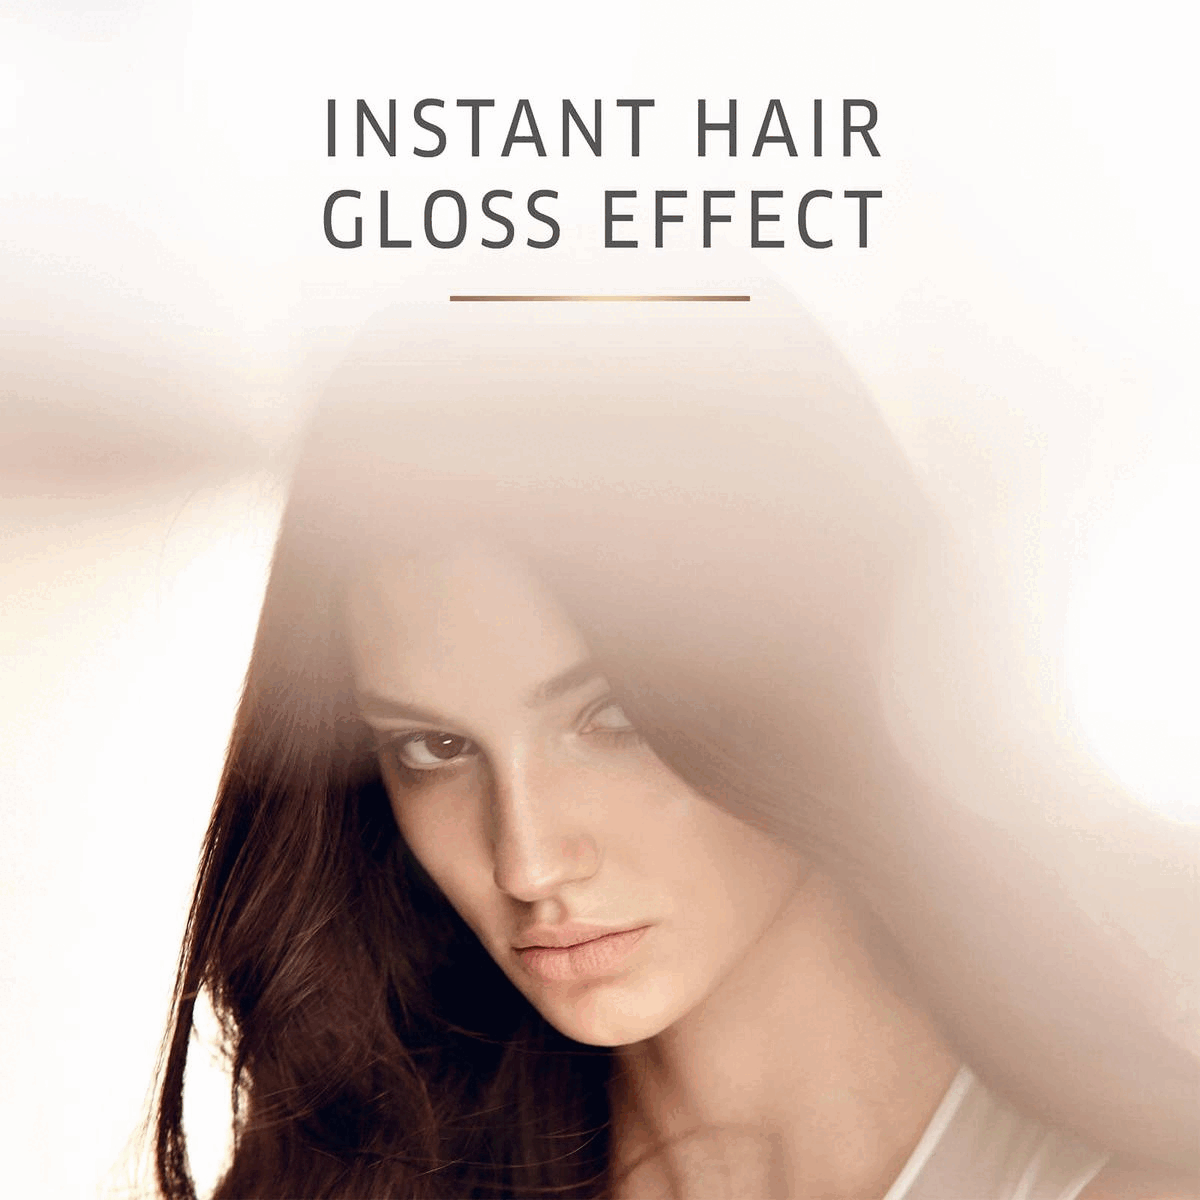 Light, luminous , reflective oil. instant hair gloss effect. oloeogy programe. 1. Shampoo with ends. 2. Mask with panthenol 3. Oil with smoothing ingredients. orient inspired scent
            